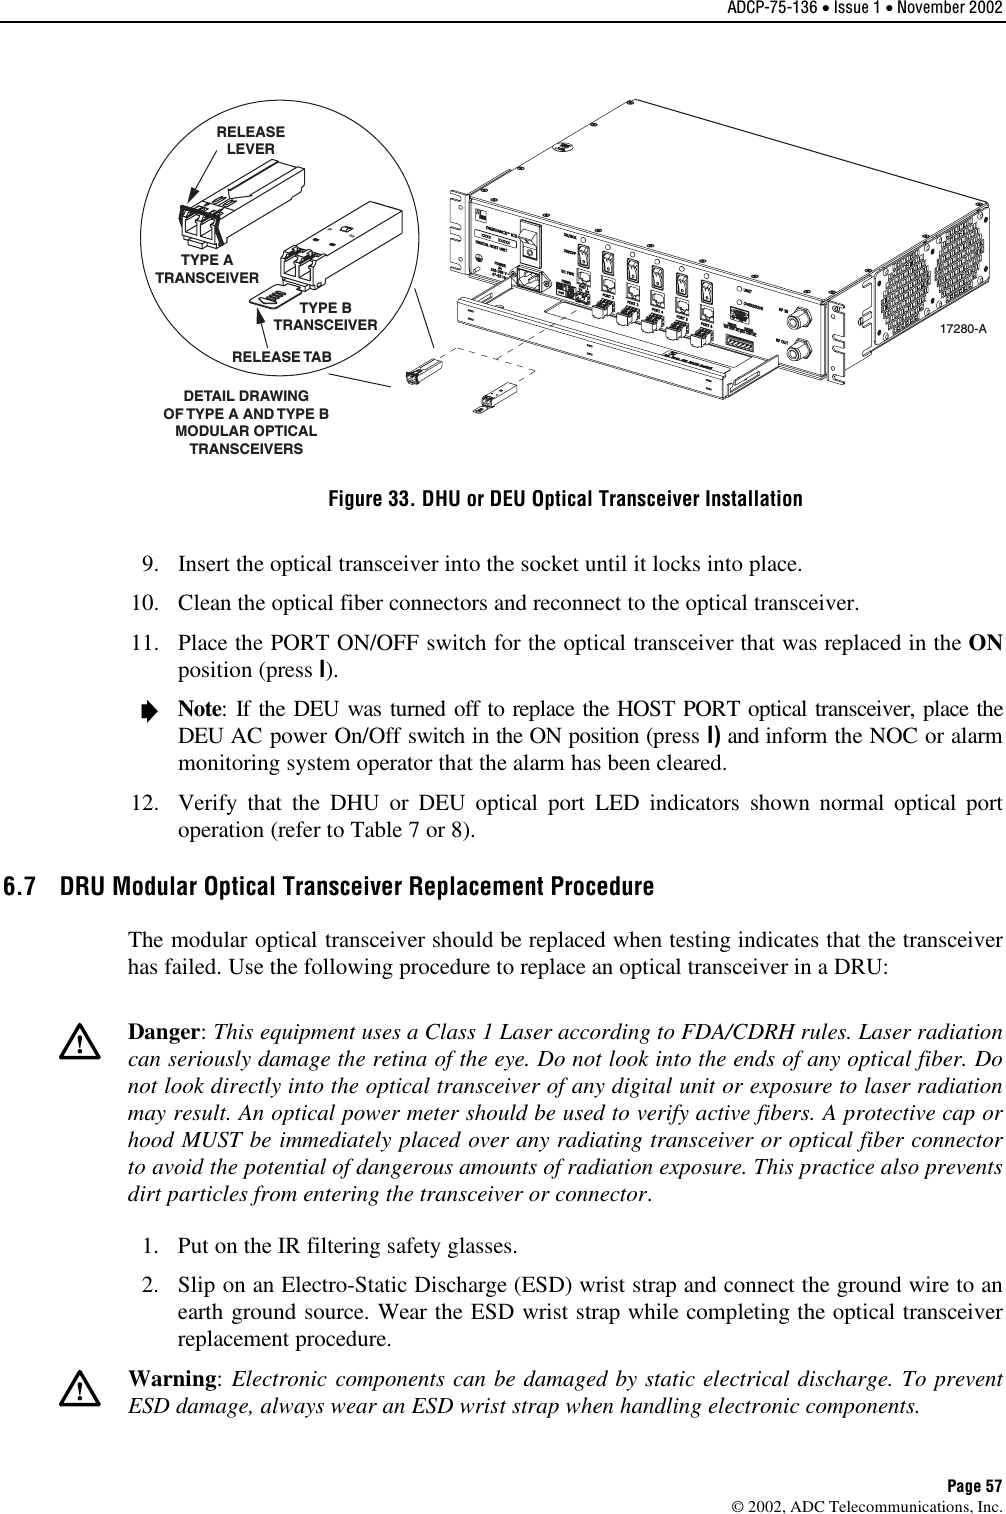 ADCP-75-136 • Issue 1 • November 2002 Page 57 ©2002, ADC Telecommunications, Inc.TXRXDETAIL DRAWINGOF TYPE A AND TYPE BMODULAR OPTICALTRANSCEIVERSTX RXTYPE ATRANSCEIVERTYPE BTRANSCEIVERRELEASELEVERRELEASE TAB17280-AFigure 33. DHU or DEU Optical Transceiver Installation 9. Insert the optical transceiver into the socket until it locks into place.10. Clean the optical fiber connectors and reconnect to the optical transceiver.11. Place the PORT ON/OFF switch for the optical transceiver that was replaced in the ONposition (press I).Note:If the DEU was turned off to replace the HOST PORT optical transceiver, place theDEU AC power On/Off switch in the ON position (press I) and inform the NOC or alarmmonitoring system operator that the alarm has been cleared.12. Verify that the DHU or DEU optical port LED indicators shown normal optical portoperation (refer to Table 7 or 8).6.7  DRU Modular Optical Transceiver Replacement Procedure The modular optical transceiver should be replaced when testing indicates that the transceiverhas failed. Use the following procedure to replace an optical transceiver in aDRU:Danger:This equipment uses aClass 1Laser according to FDA/CDRH rules. Laser radiationcan seriously damage the retina of the eye. Do not look into the ends of any optical fiber. Donot look directly into the optical transceiver of any digital unit or exposure to laser radiationmay result. An optical power meter should be used to verify active fibers. Aprotective cap orhood MUST be immediately placed over any radiating transceiver or optical fiber connectorto avoid the potential of dangerous amounts of radiation exposure. This practice also preventsdirt particles from entering the transceiver or connector.1. Put on the IR filtering safety glasses.2. Slip on an Electro-Static Discharge (ESD) wrist strap and connect the ground wire to anearth ground source. Wear the ESD wrist strap while completing the optical transceiverreplacement procedure.Warning:Electronic components can be damaged by static electrical discharge. To preventESD damage, always wear an ESD wrist strap when handling electronic components.